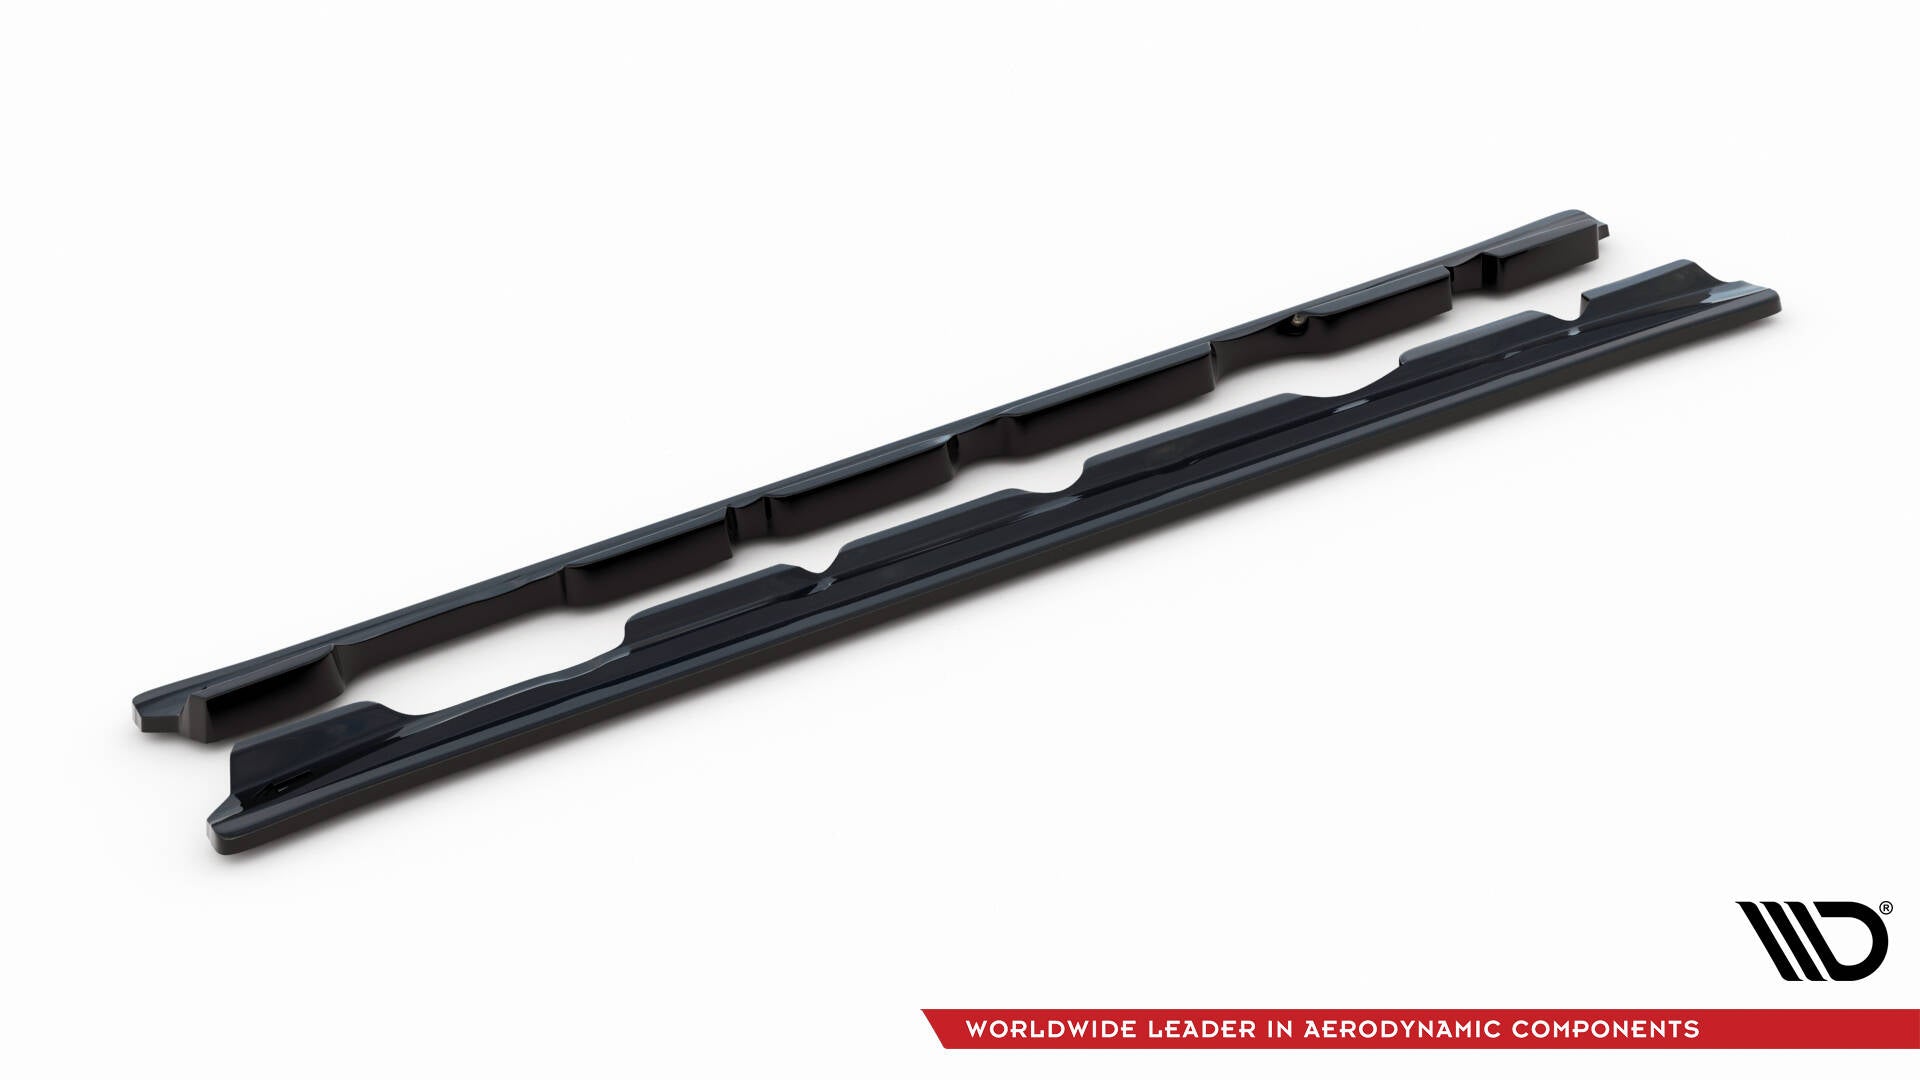 SIDE SKIRTS DIFFUSERS Fiat Tipo S-Design